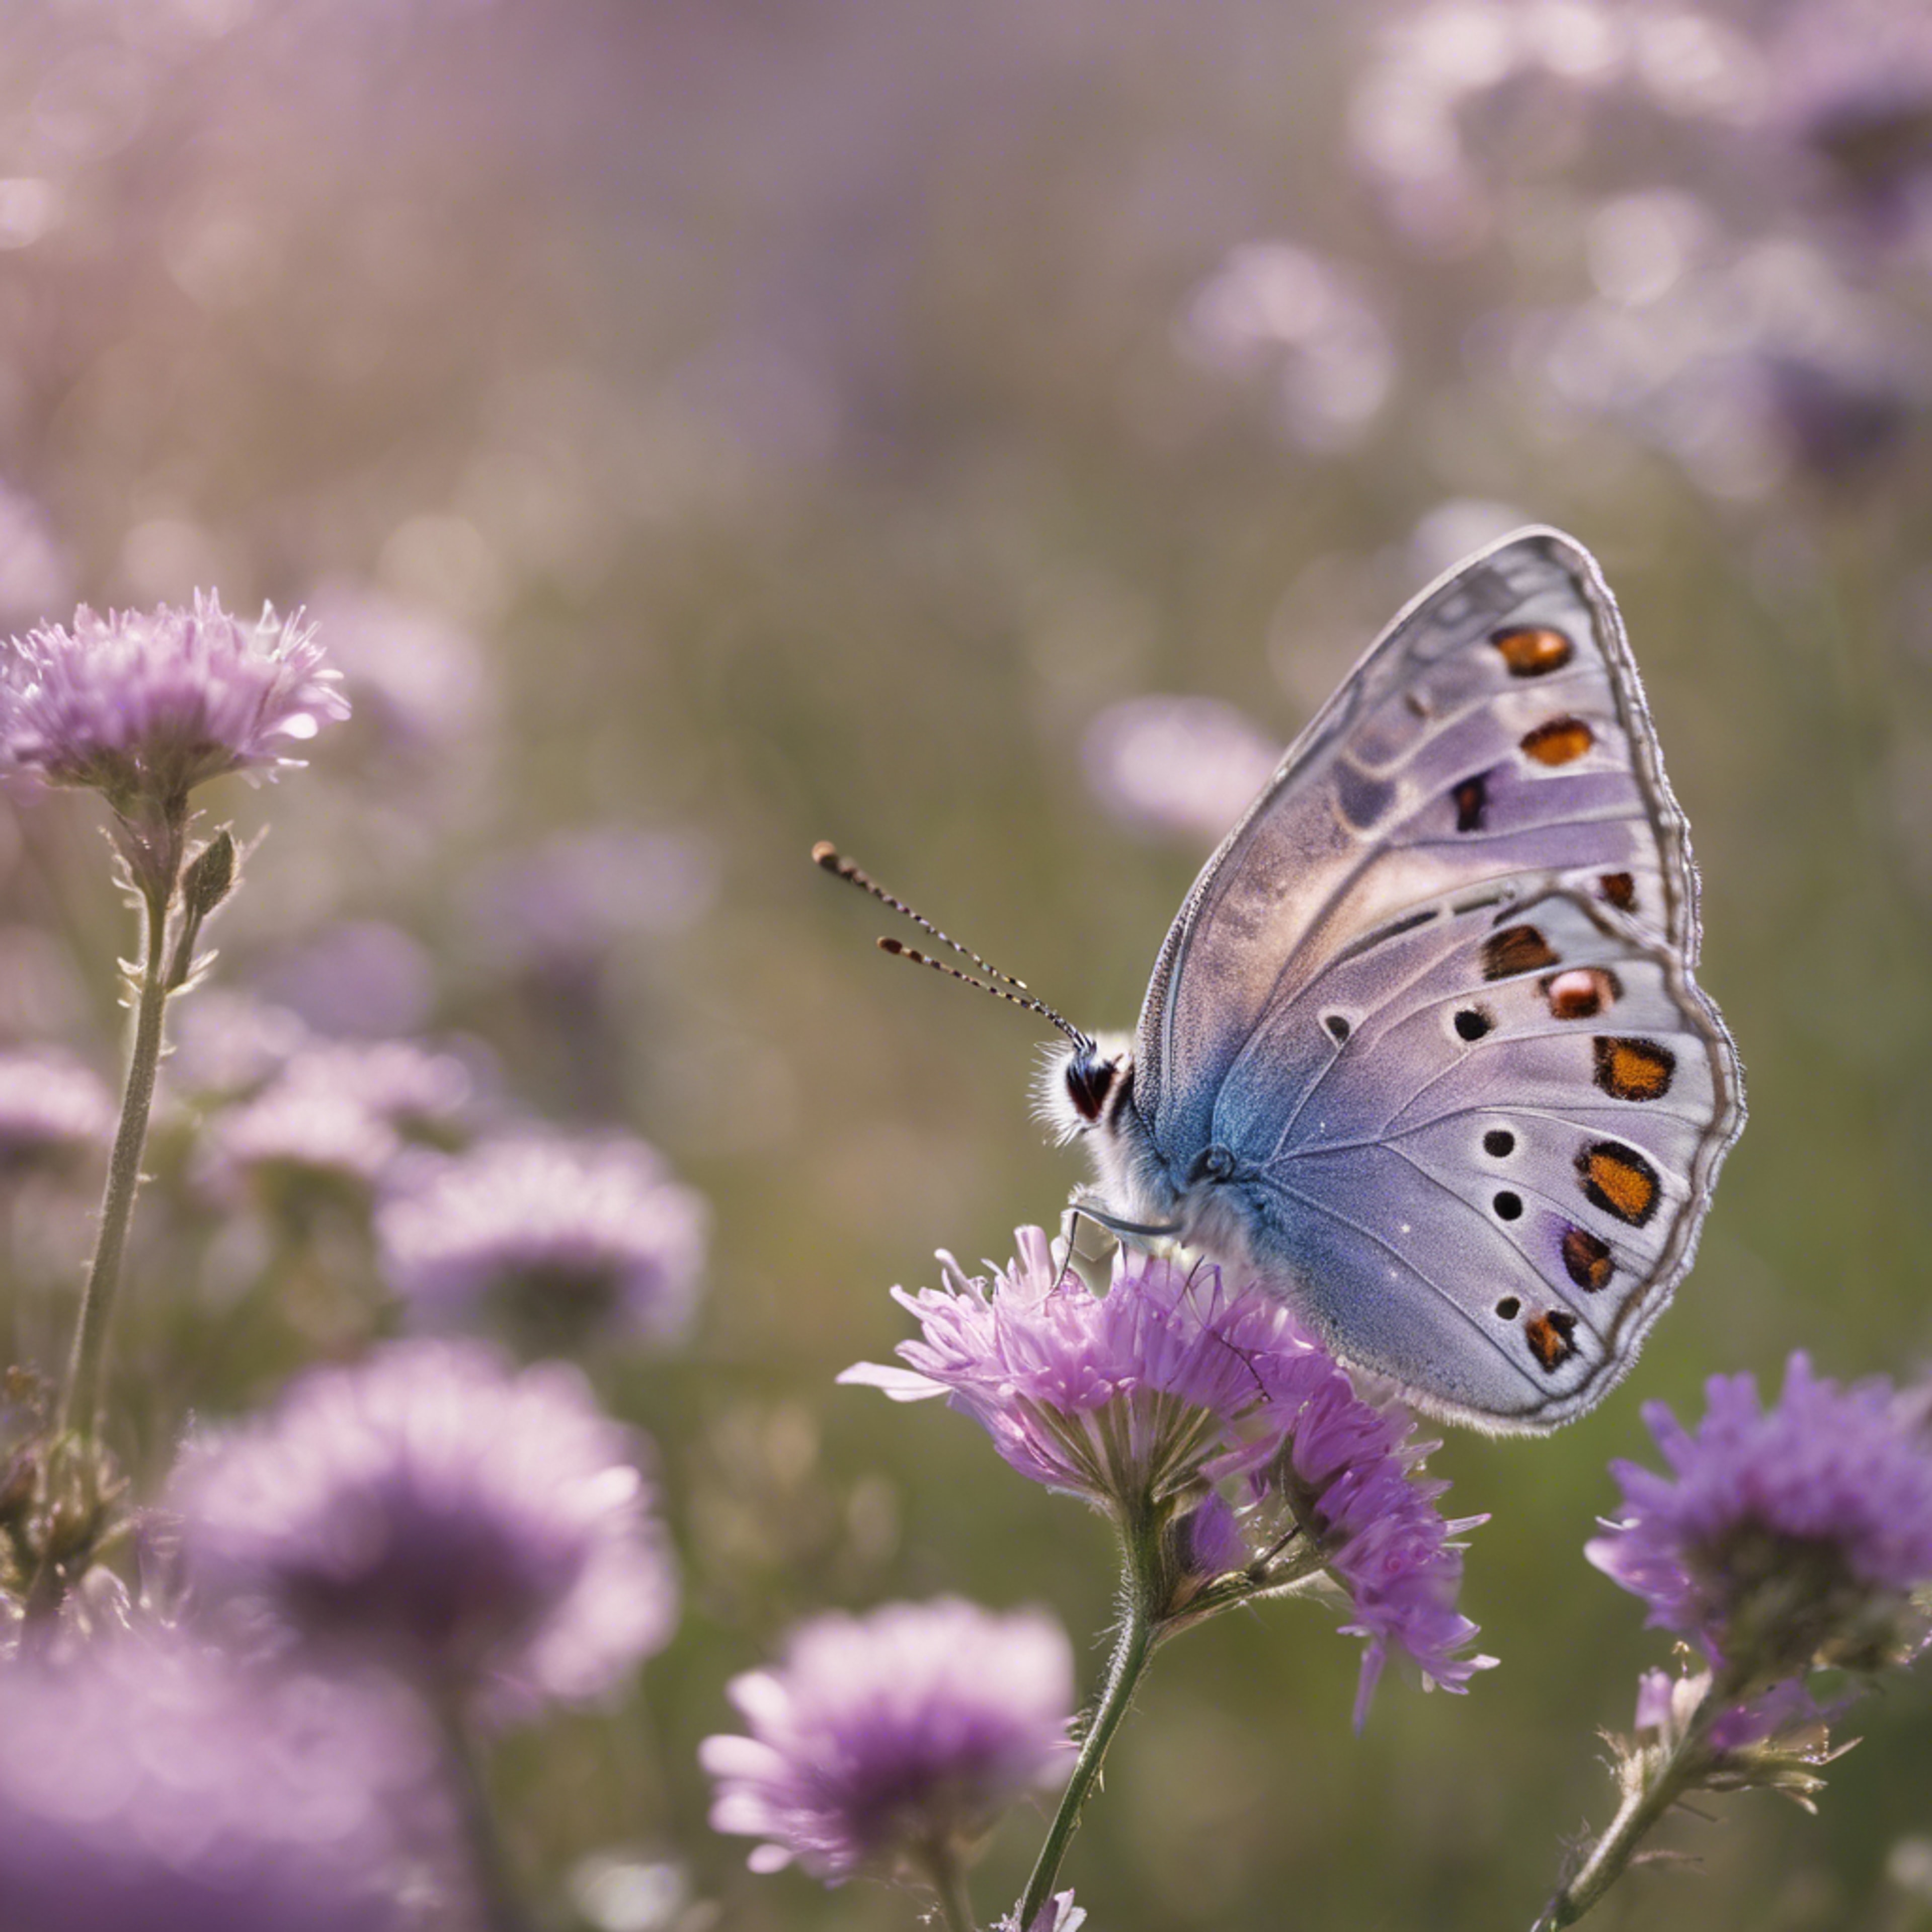 A playful light purple butterfly fluttering freely amidst wildflowers. Тапет[992811f2a8e14925b1c6]